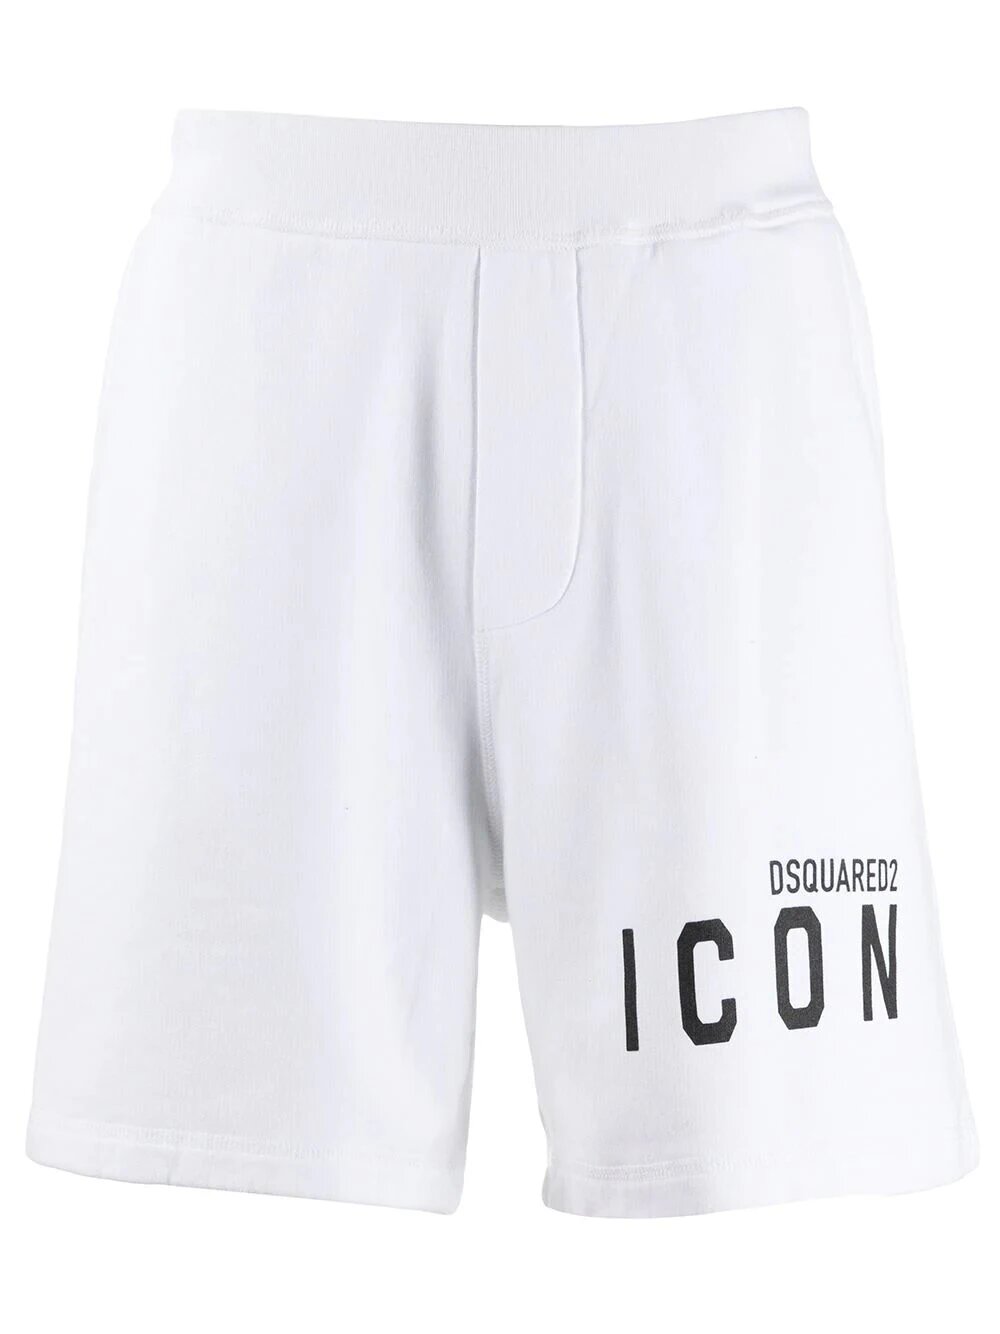 Dsquared2 ICON Hoodie and Short Set in White